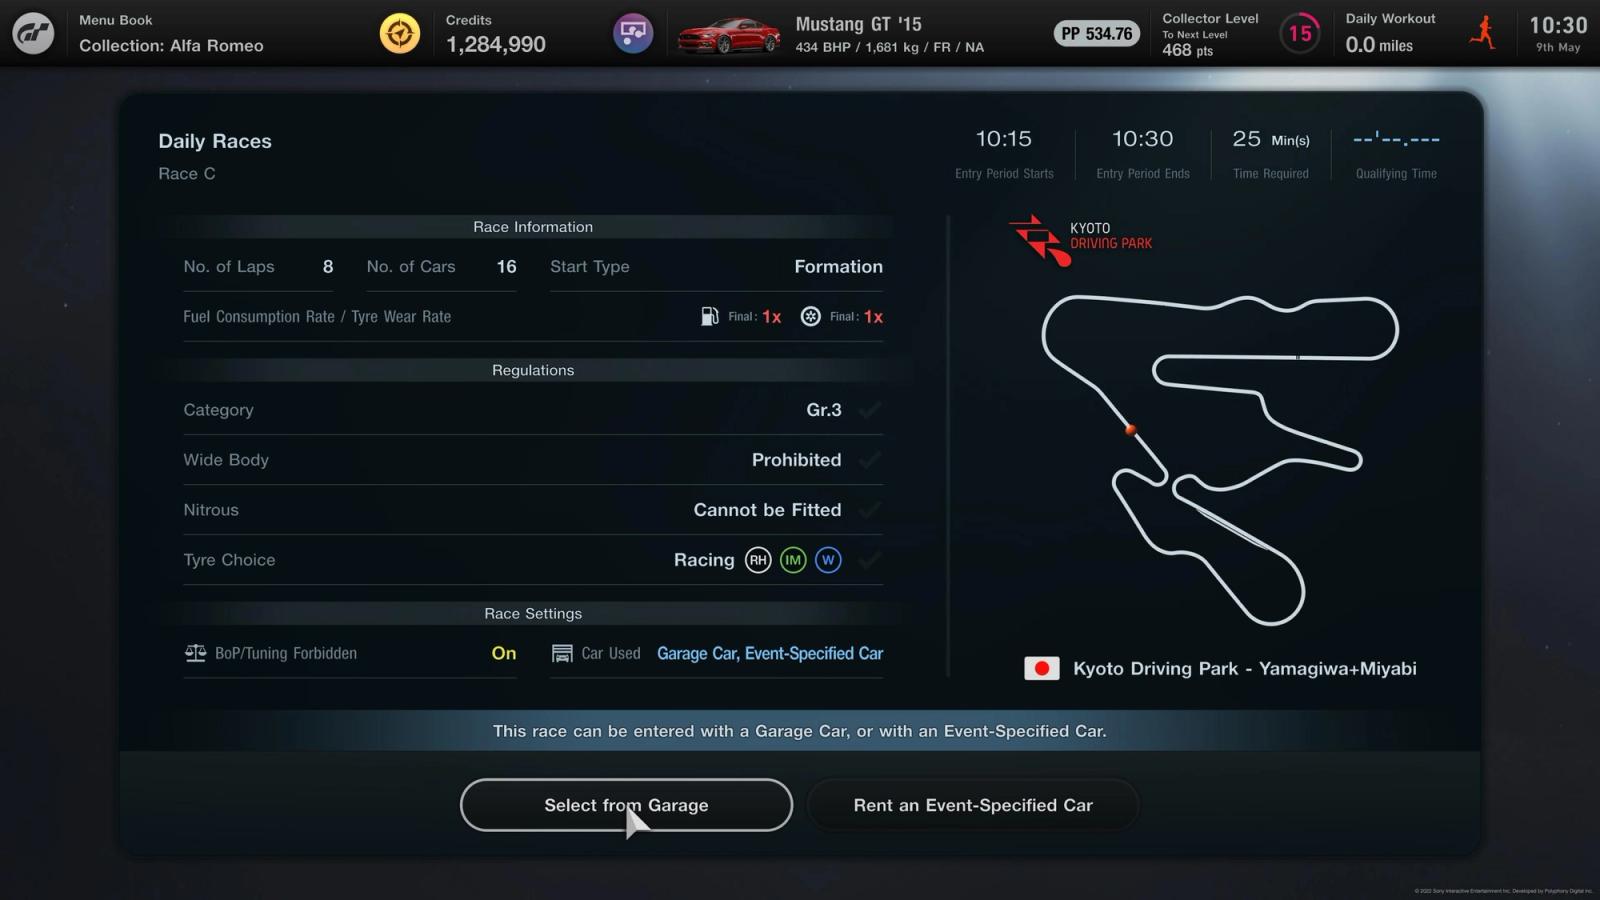 All the details of Daily Race C in Gran Turismo  on 9 May.